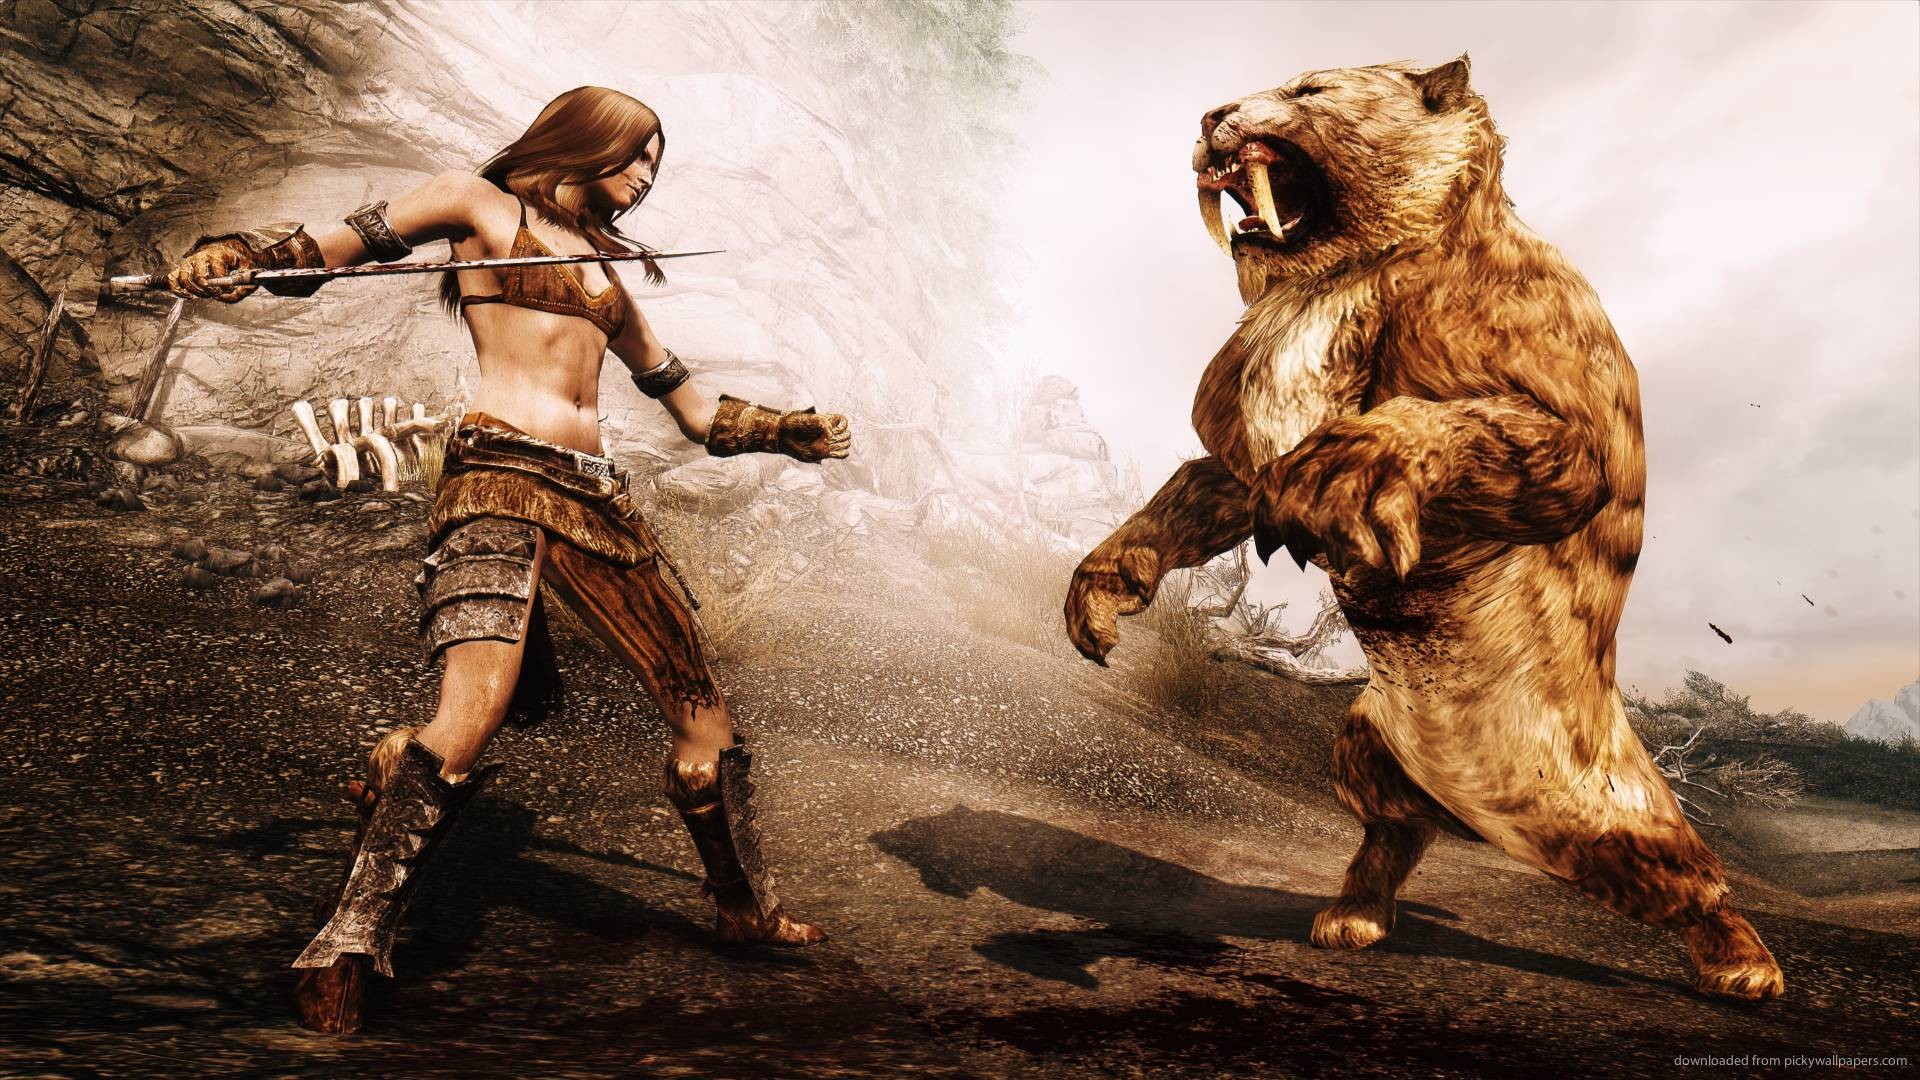 1920x1080 Skyrim Fight With A Sabre Tooth Tiger Wallpaper For iPad